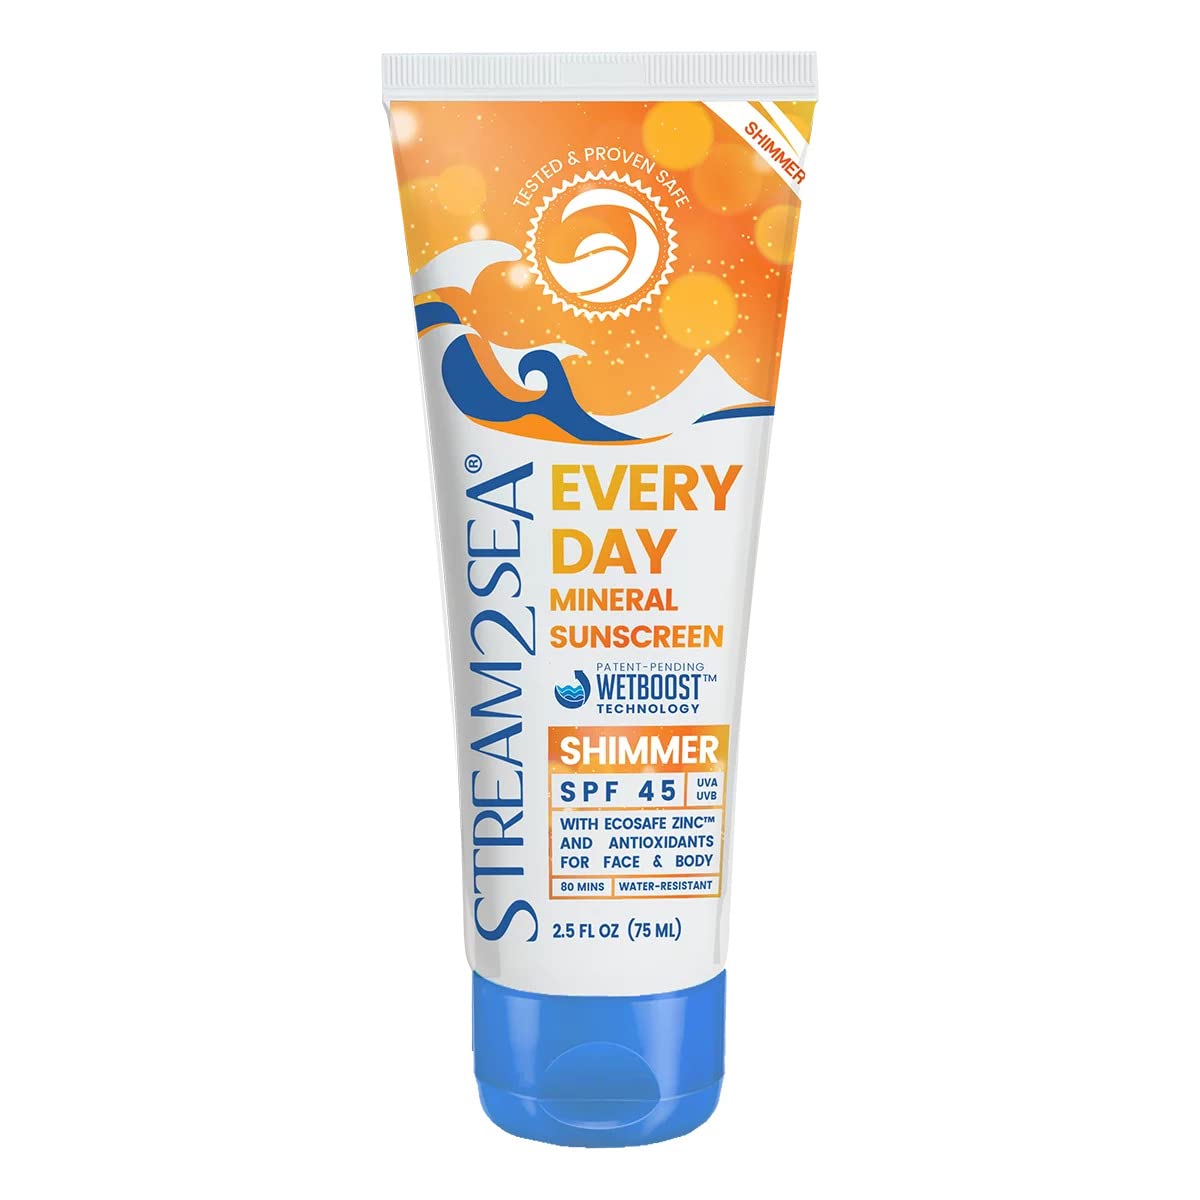 SPF 45 Every Day Shimmer Mineral Sunscreen | 2.5 Fl Oz Biodegradable, Paraben Free & Reef Safe Sunscreen | Non-Greasy, Lightweight & Shimmer Mineral Protection Against UVA & UVB for Face & Body